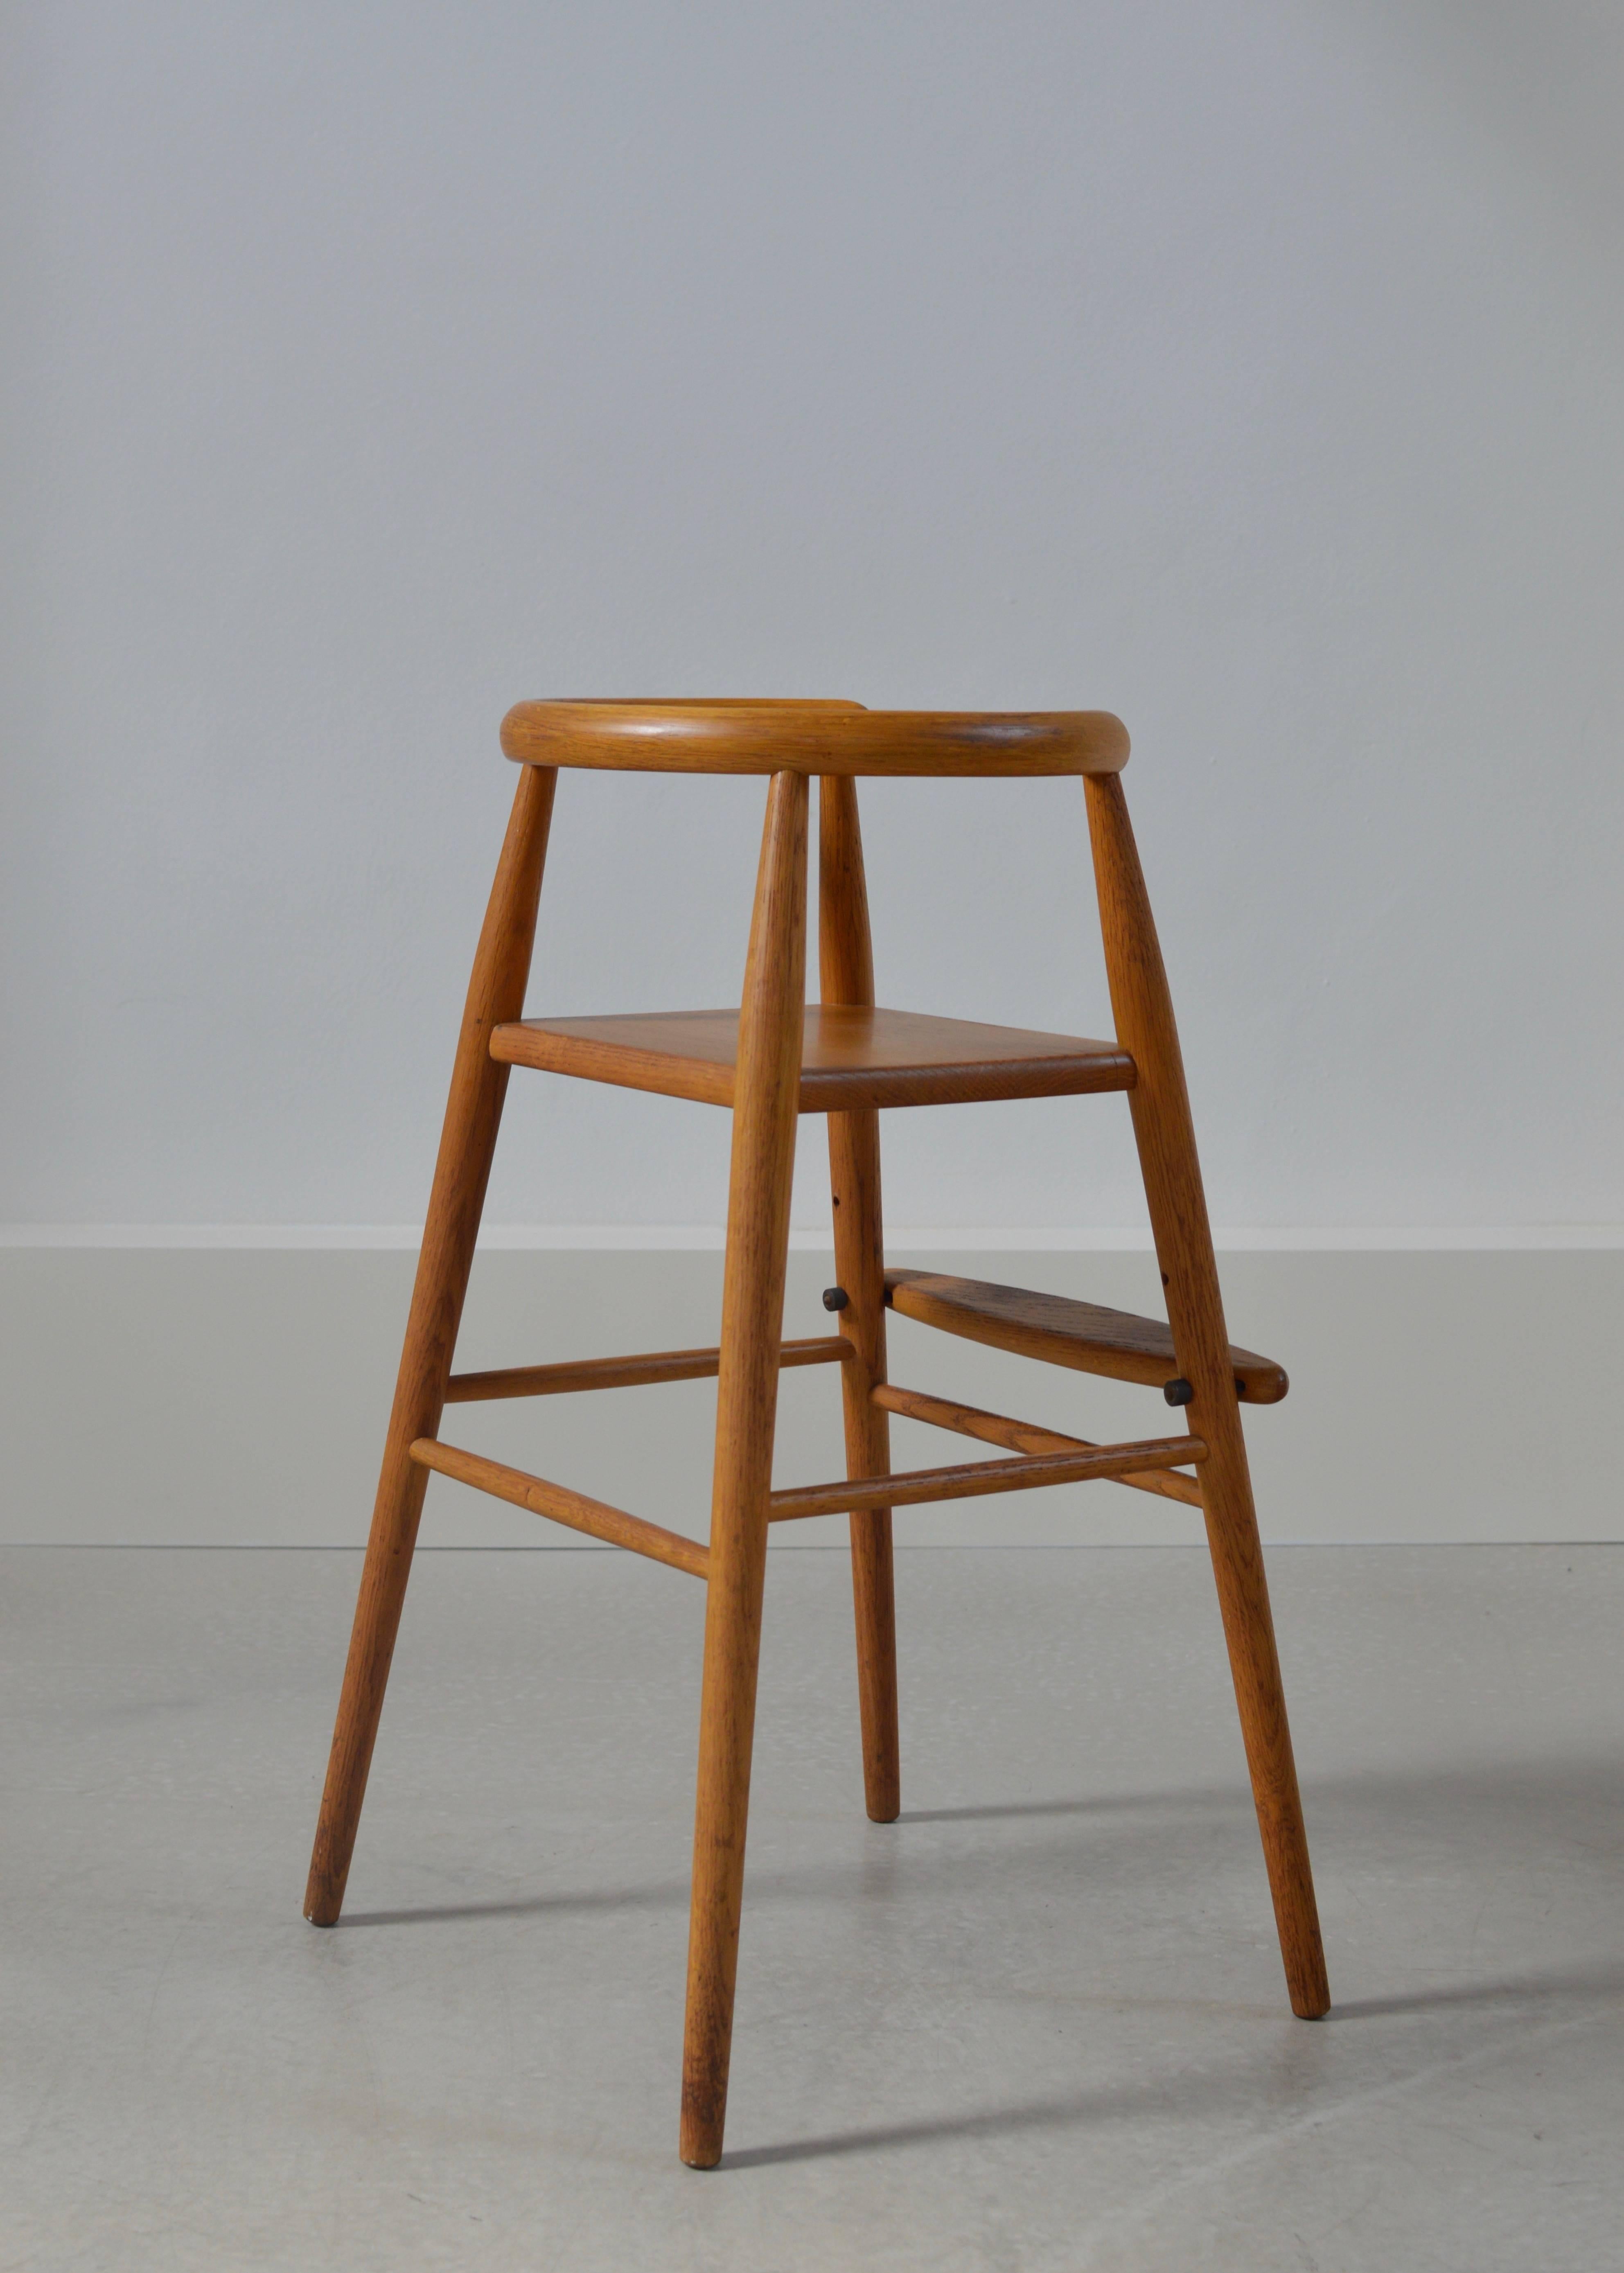 Solid oak children's high chair by Nanna Ditzel for Kolds Savvaerk, Denmark with adjustable foot rest in lovely gently used condition.